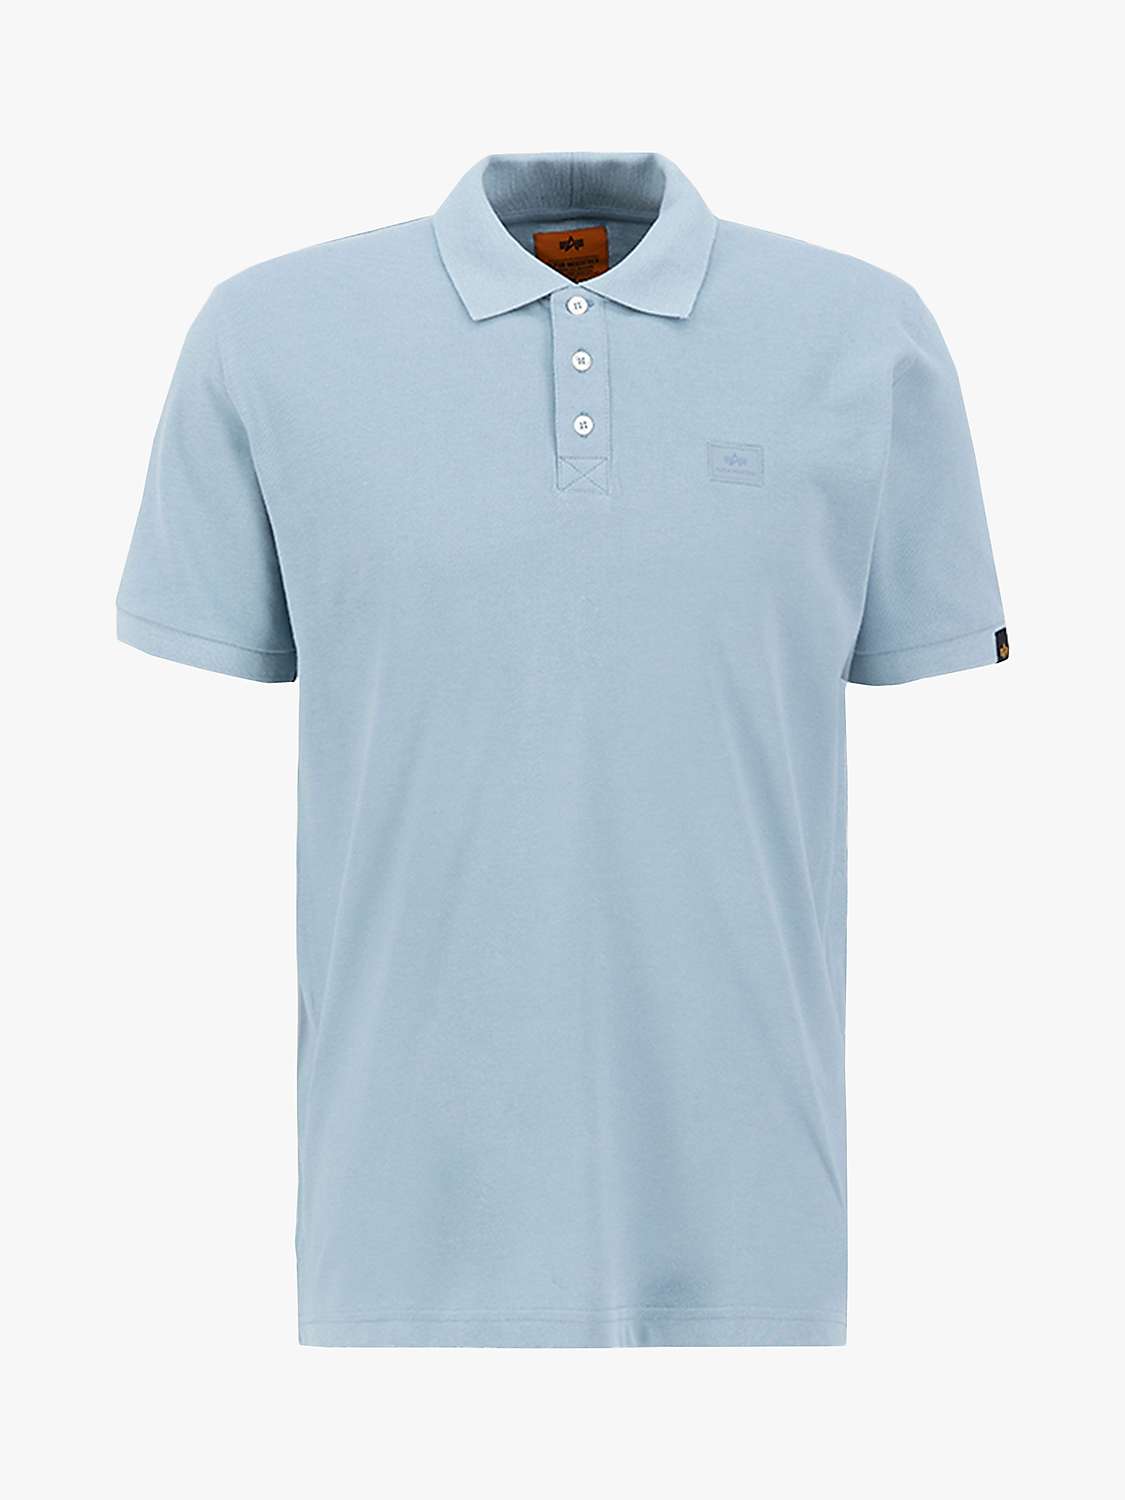 Alpha Industries X-Fit Polo, Greyblue at John Lewis & Partners